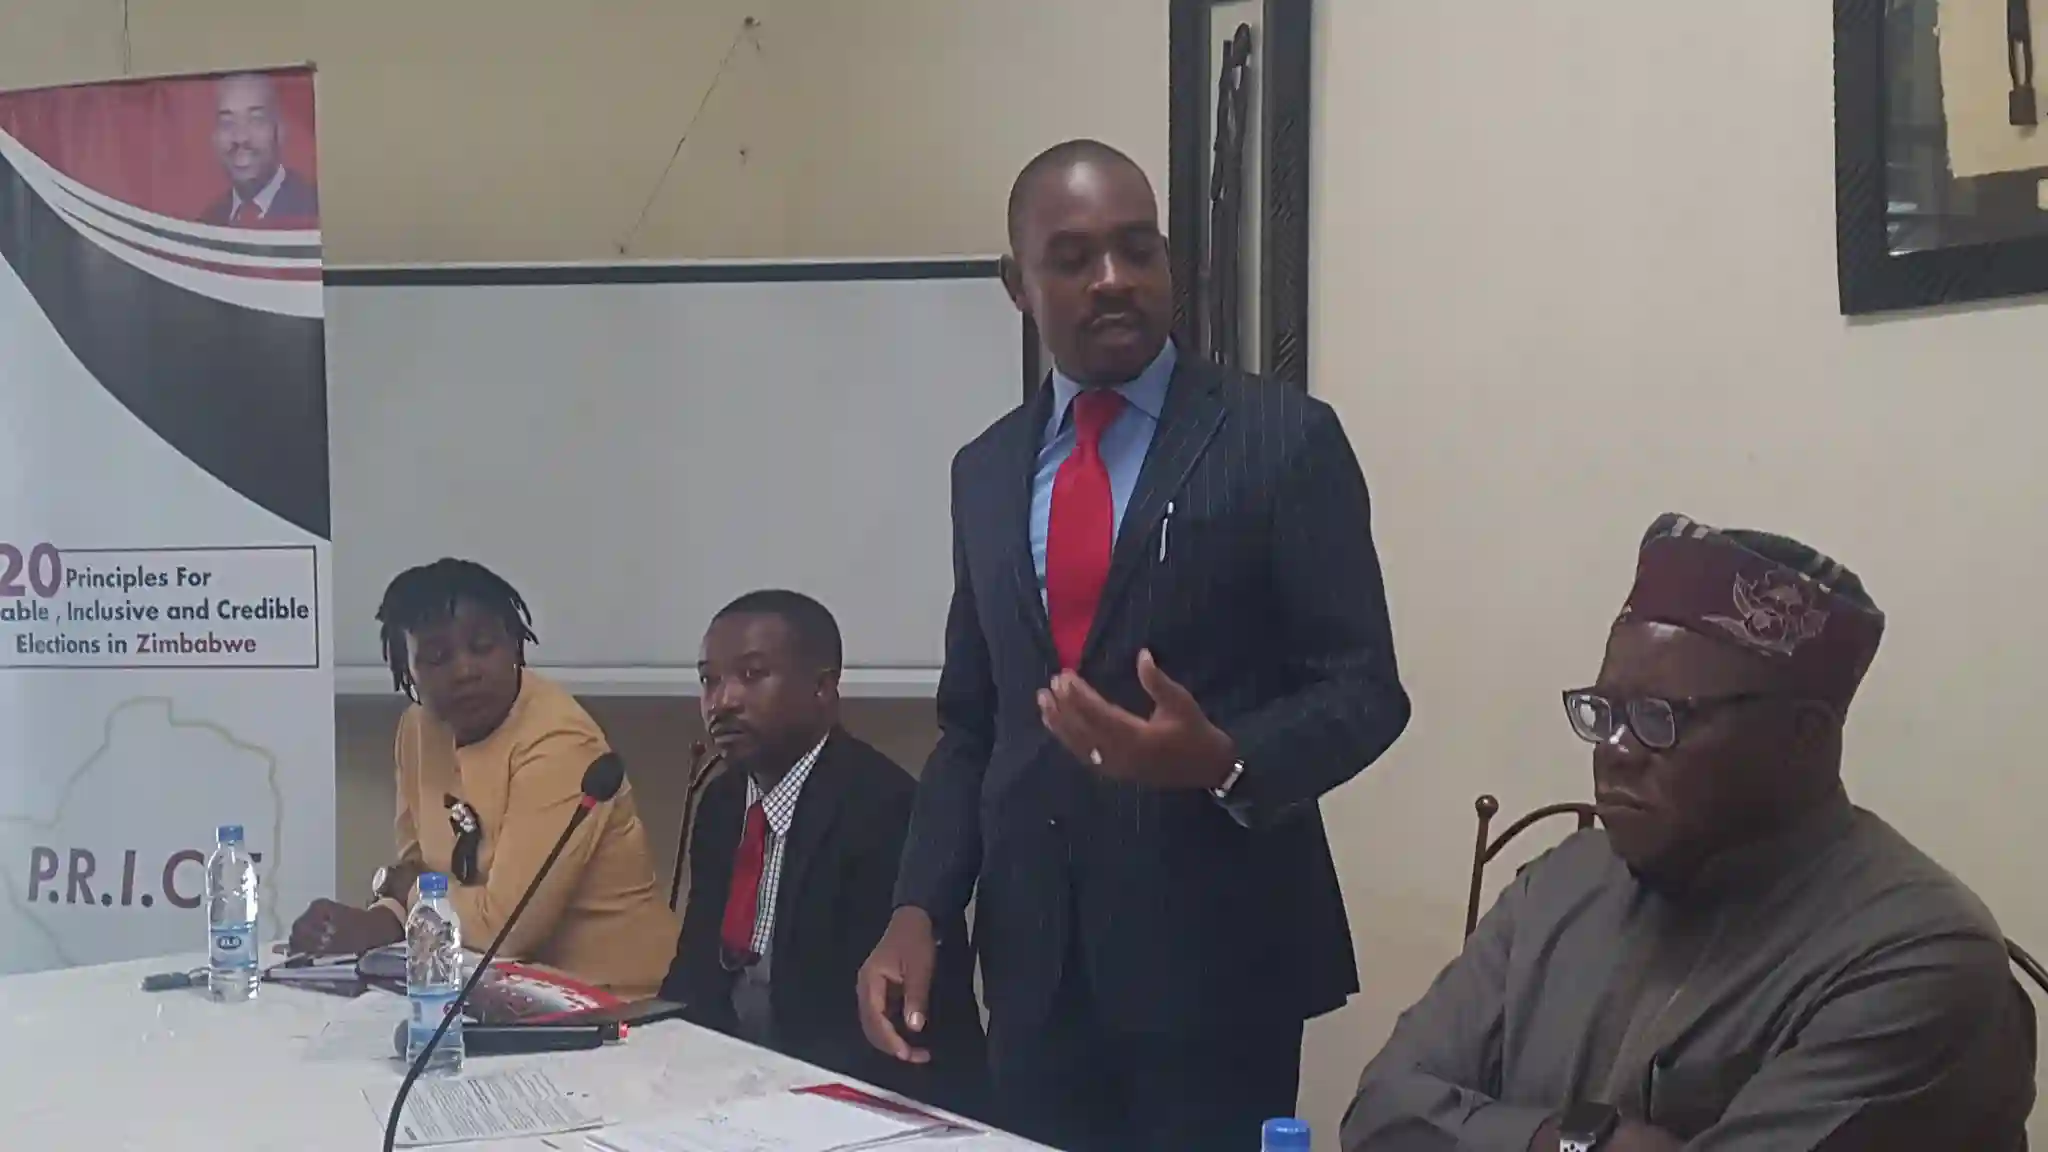 WATCH: Why Chamisa Will Never Call For Demonstrations For Now - MDC Member